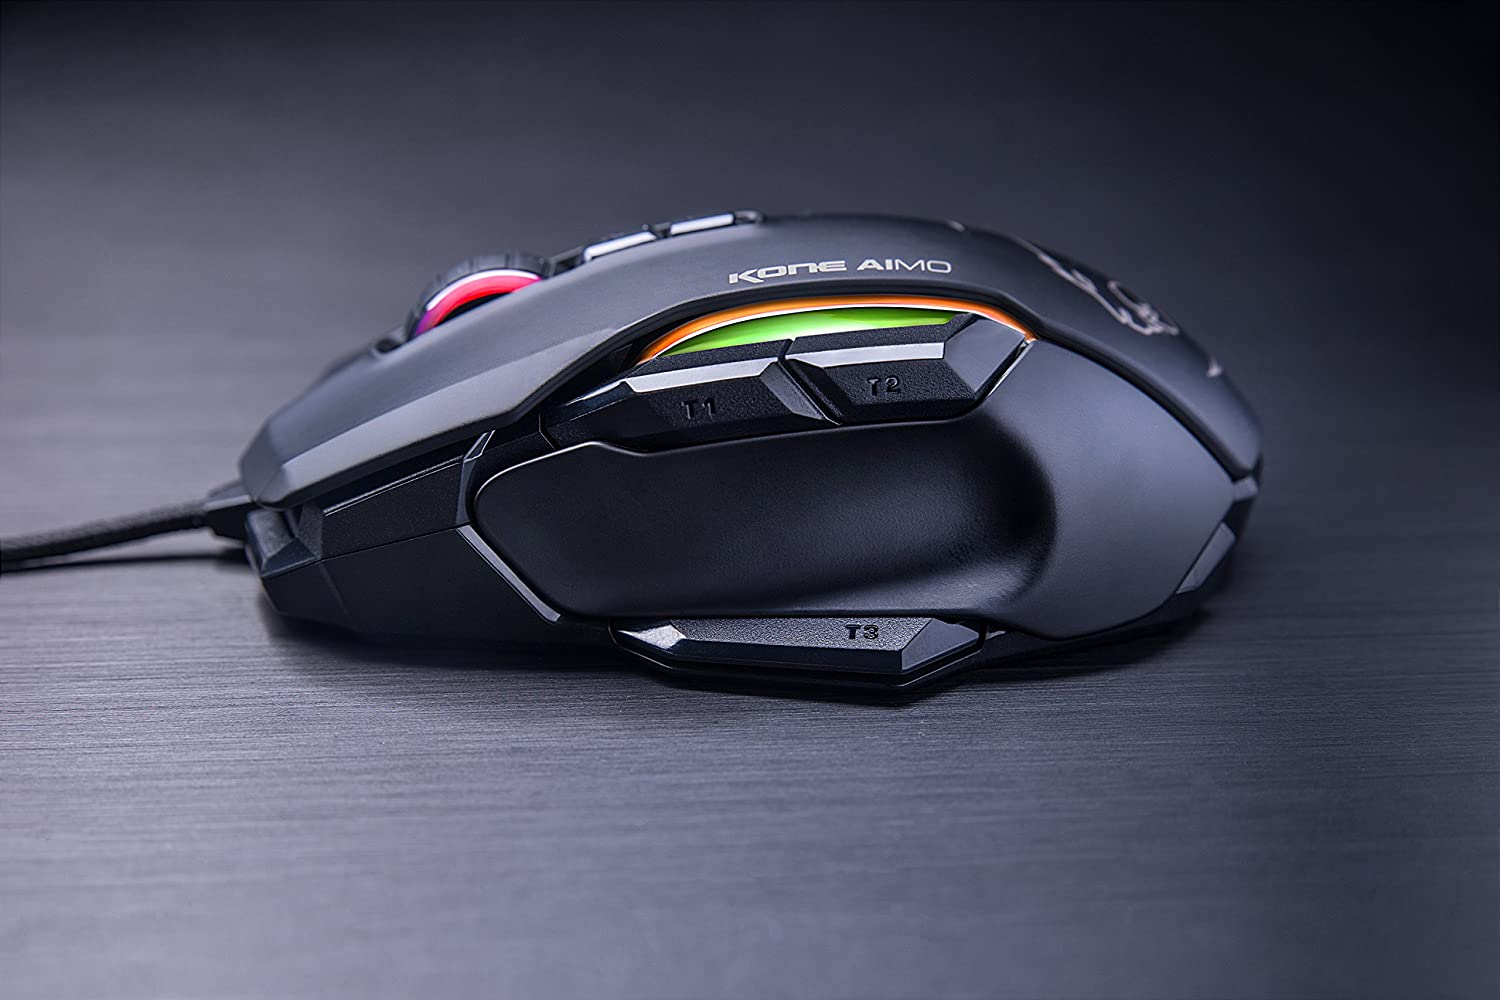 Tt76I7D6 Roccat Https://Youtu.be/Mfk3Bmiiu8C Roccat® Swarm Powered – Comprehensive Driver Suite With A Striking Design And A Stunning Feature Set, The Kone Aimo Channels The Legacy Of Its Predecessor. It Boasts Refined Ergonomics With Enhanced Button Distinction, But What Truly Sets It Apart Is Its Rgba Double Lightguides Powered By The State-Of-The-Art Aimo Intelligent Lighting System. Aimo Is The Vivid Illumination Eco-System From Roccat®. Its Functionality Grows Exponentially Based On The Number Of Aimo-Enabled Devices Connected. It Also Reacts Intuitively And Organically To Your Computing Behavior. Eliminating The Need For Configuration, It Presents A State-Of-The-Art Lighting Scenario Right Out Of The Box, For A Completely Fluid, Next-Gen Experience. The Kone Aimo Features A Tri-Button Thumb Zone For A New And Even Greater Level Of Control. It Includes Two Wide Buttons Suitable For All Hand Sizes, Plus An Ergonomic Lower Button Set To Easy-Shift[+]™ By Default. Easy-Shift[+]™ Is The World-Famous Button Duplicator Technology That Lets You Assign A Secondary Function To The Mouse'S Buttons. It'S Easy To Program And Has Options For Simple Commands And Complex Macros. Roccat - ماوس ألعاب مخصص ذكي من Kone Aimo Rgba (أسود) 23 مفتاحًا قابلًا للبرمجة ، مصمم في ألمانيا